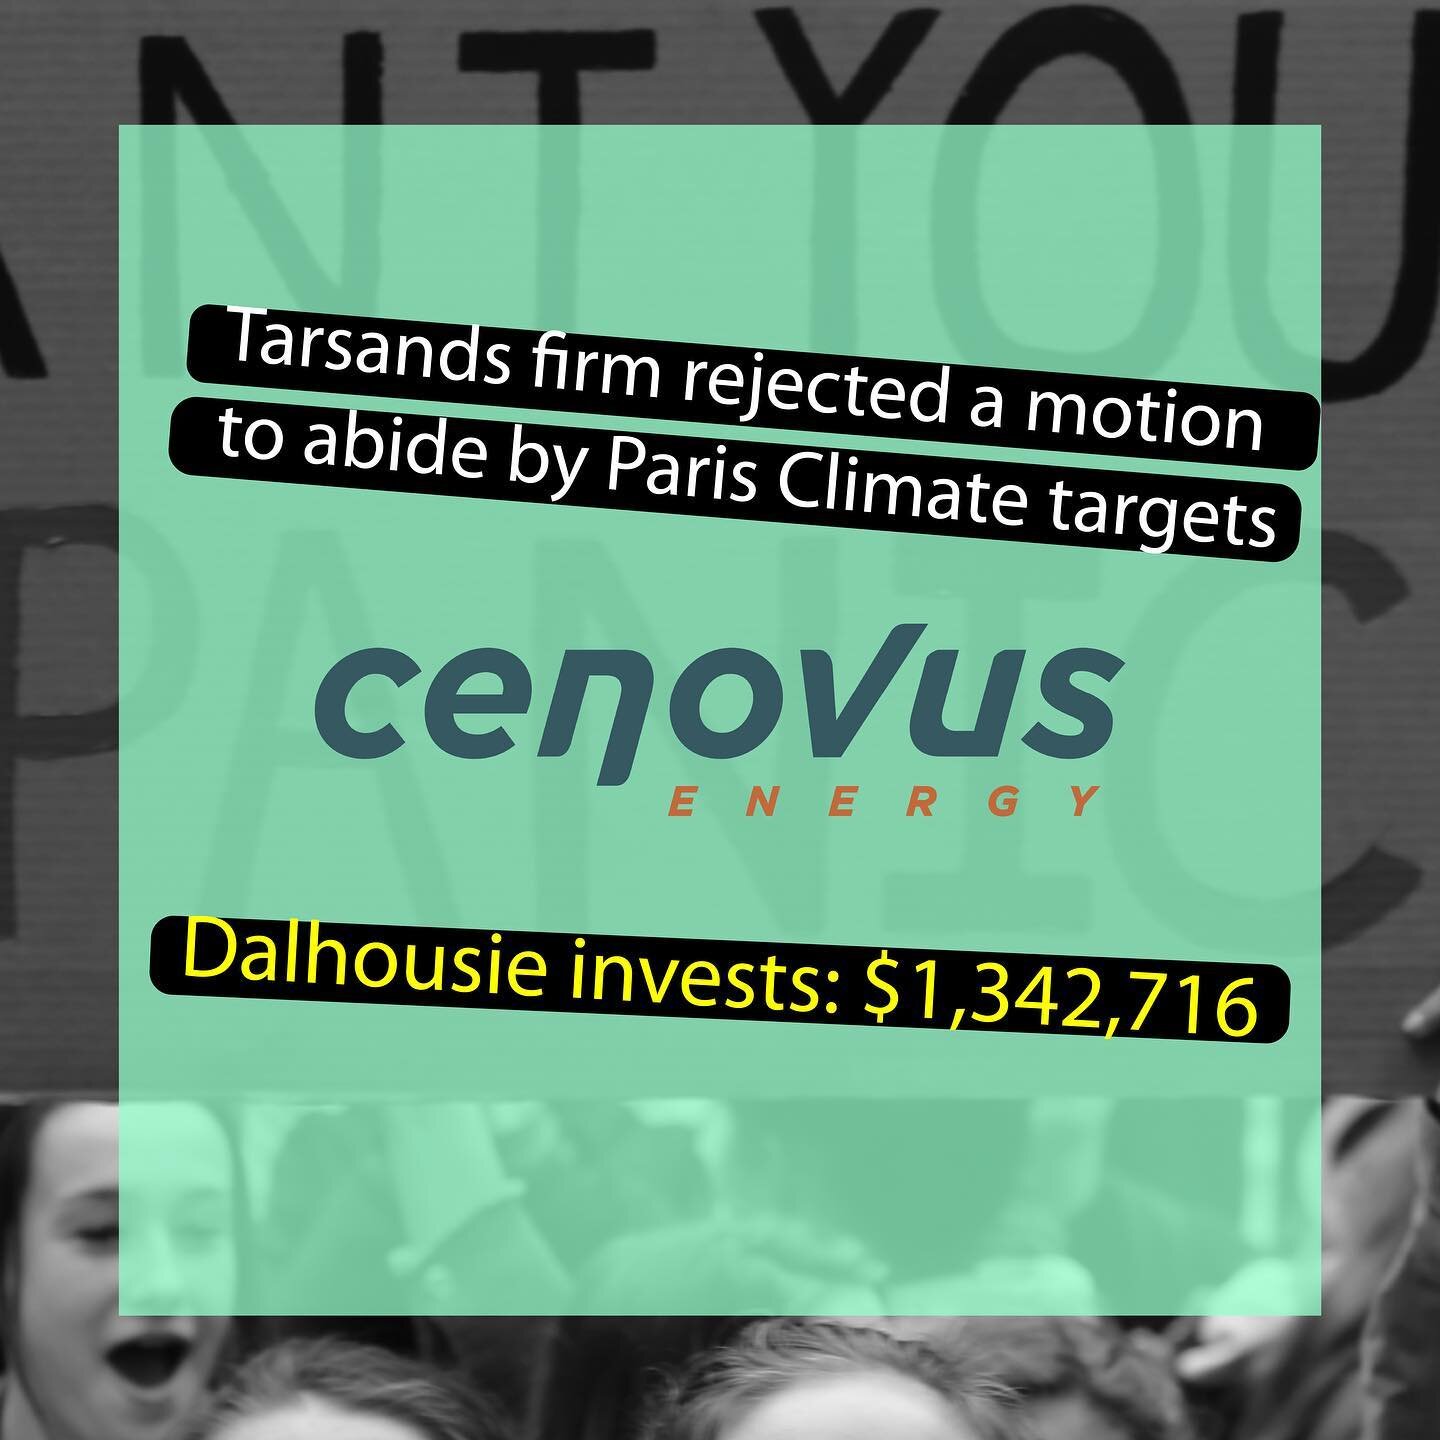 Paris targets get us to a habitable world, maybe. @cenovusenergy rejected a shareholder motion to abide by these targets. We know from countless international reports that exceeding 2 degree Celsius warming is not compatible with a civilized global c